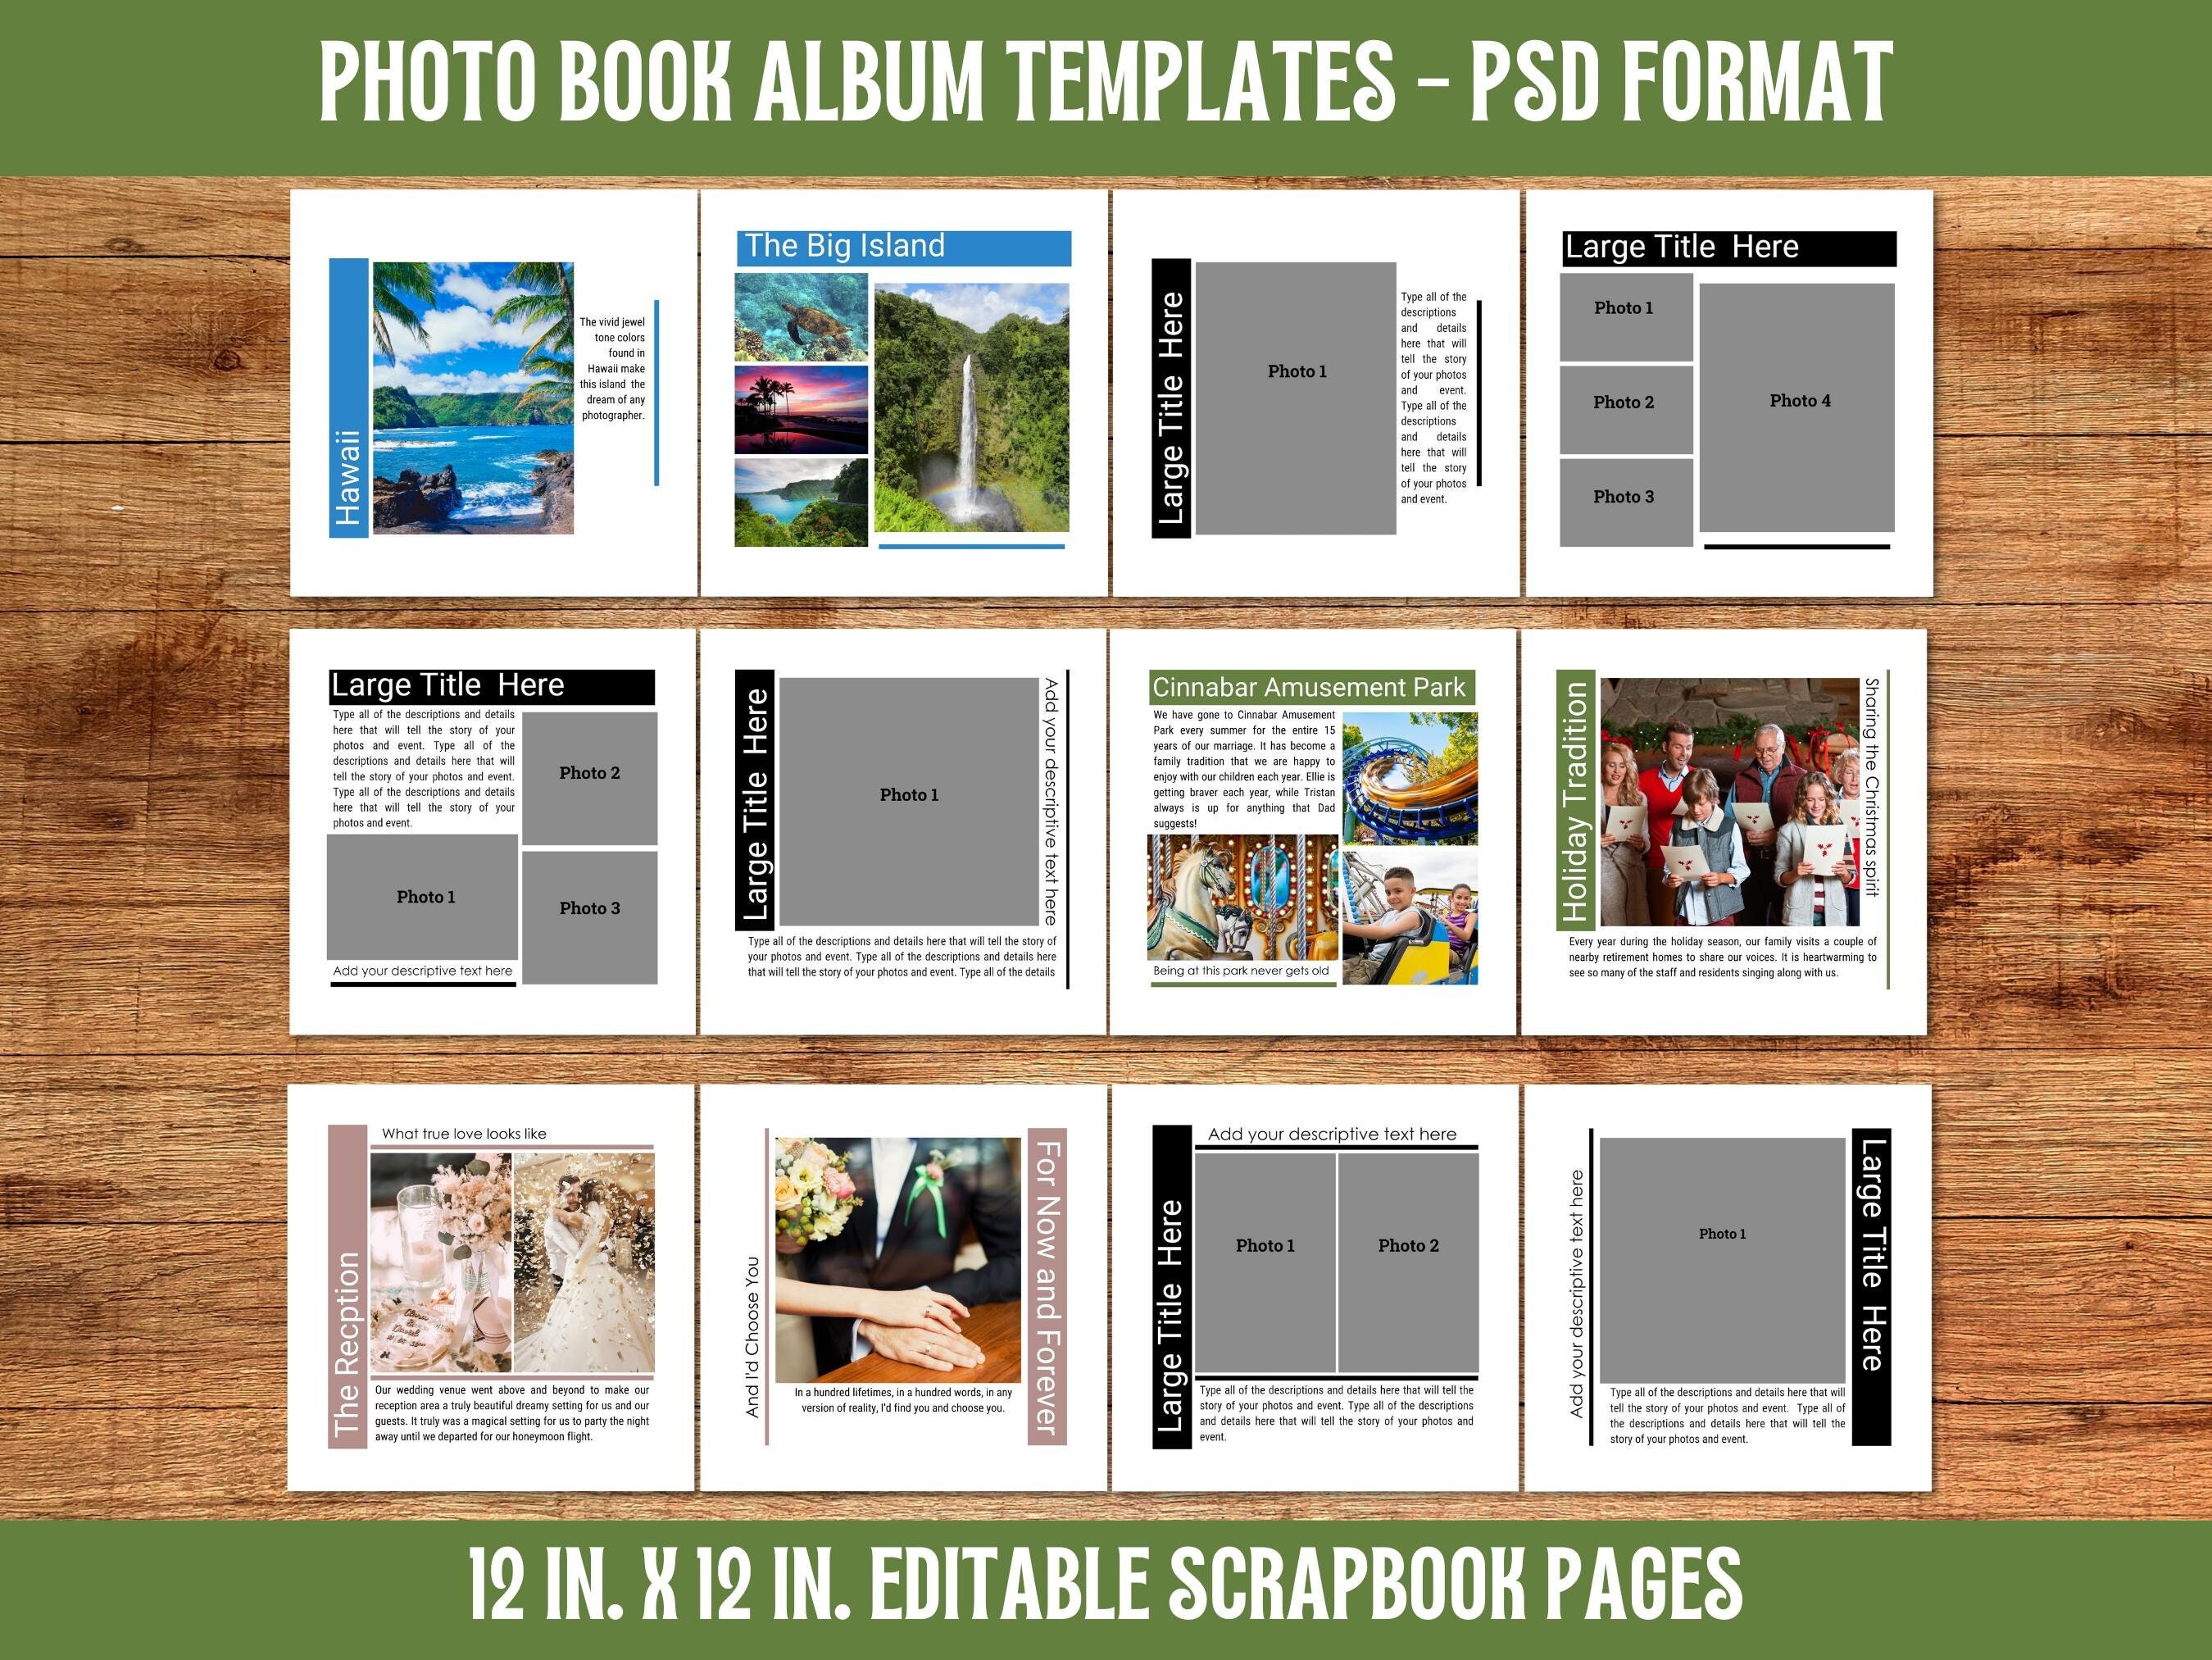 Mariage 2022 Album photo PSD Photoshop Template, Livre photo de mariage  Photoshop Template, Album photo imprimable, 12x12in, 10x10in, WA71 -   Canada